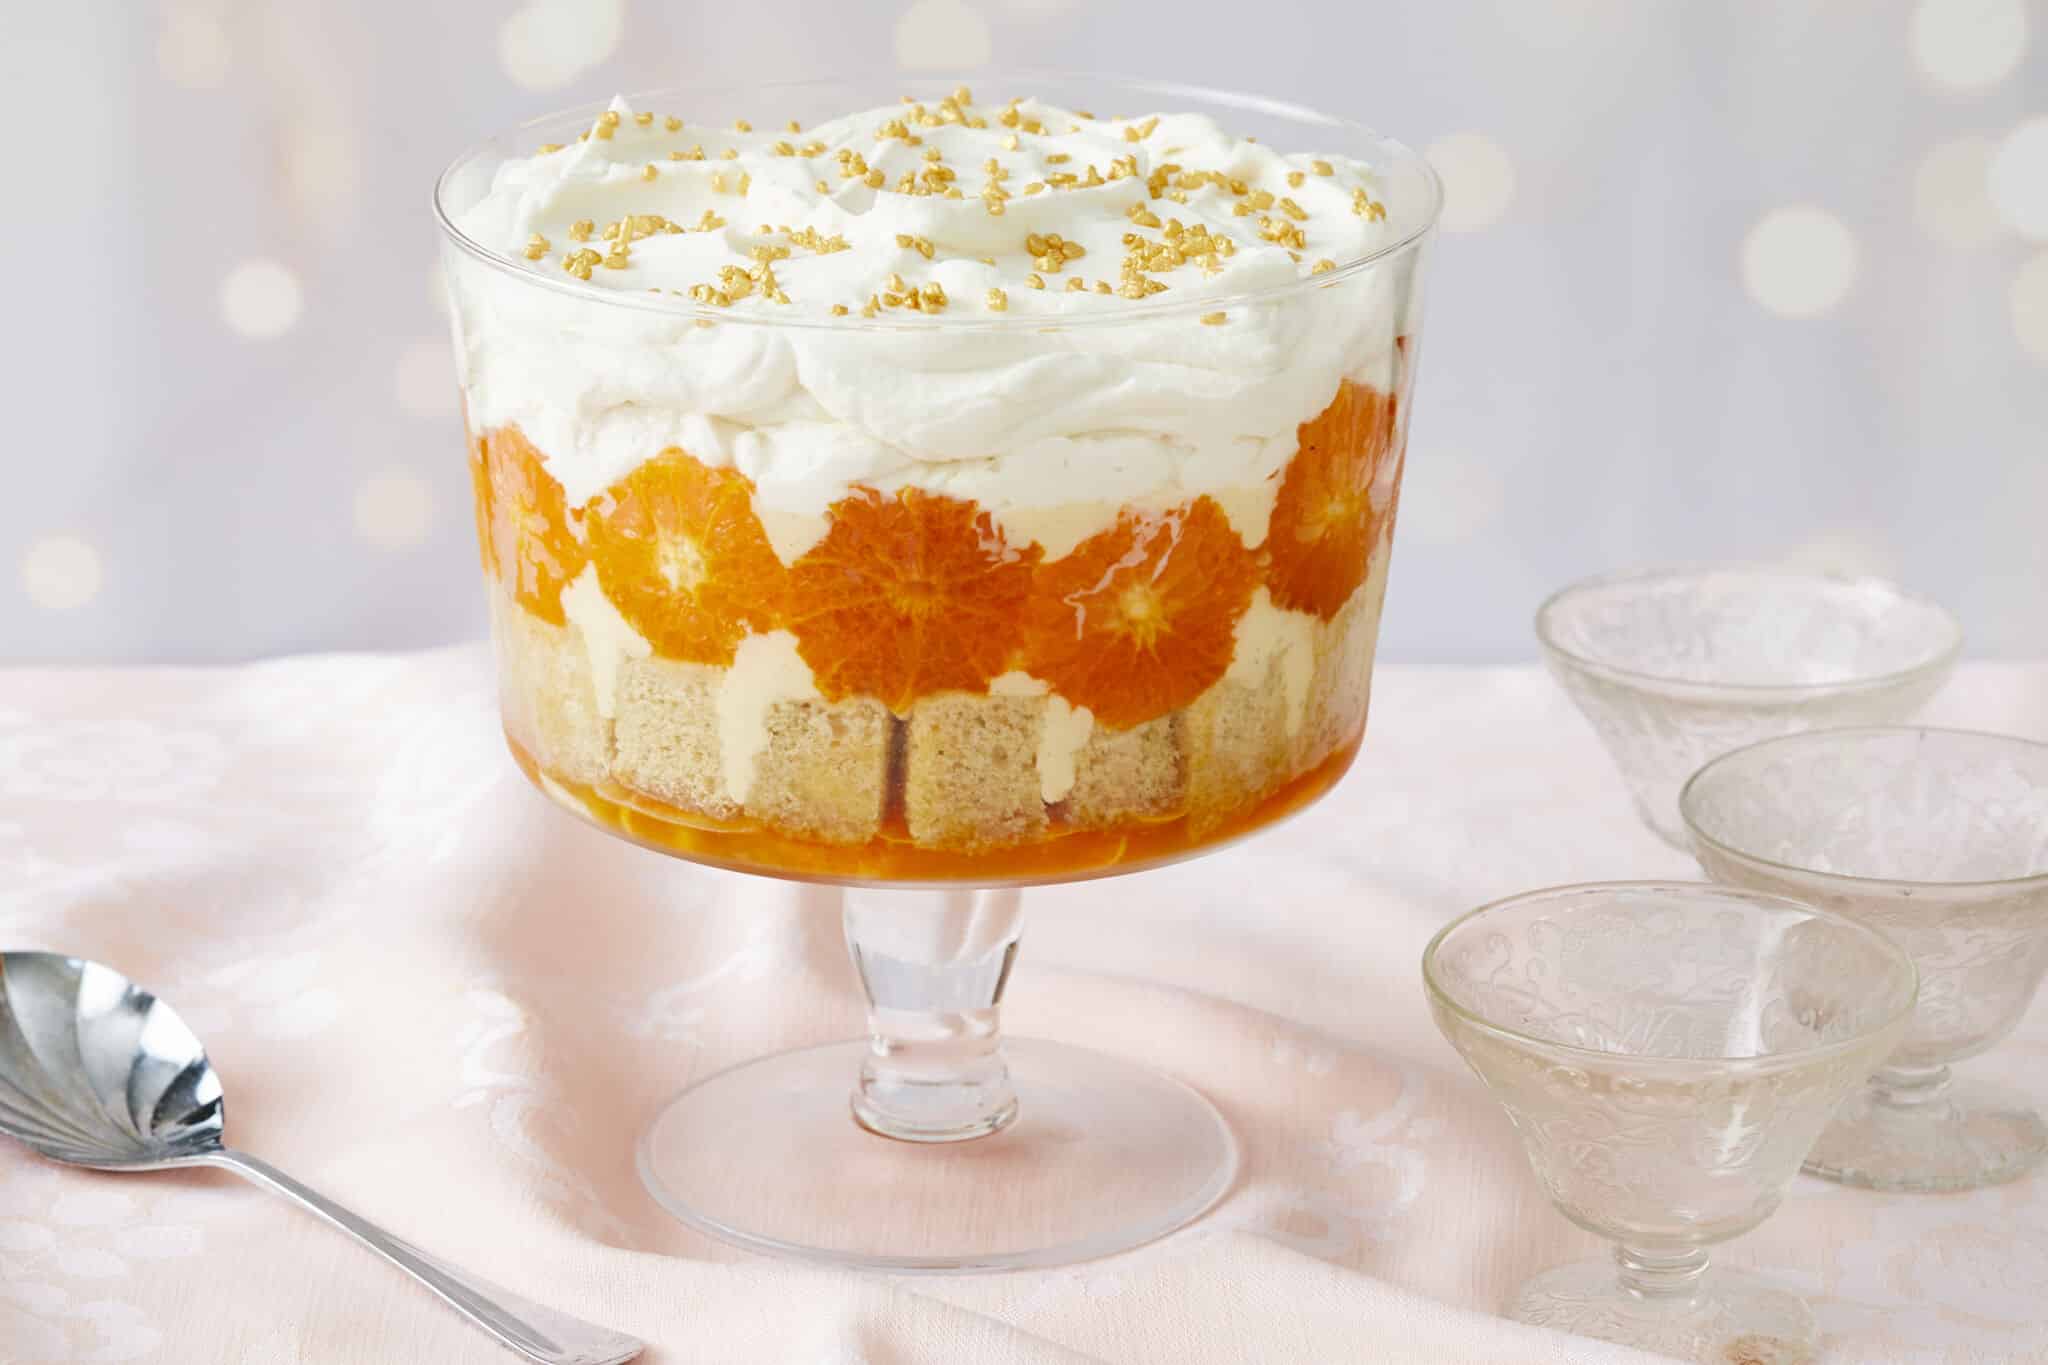 A stunning Sweet and Zesty Clementine Trifle with Boozy Amaretto consists of layers of clementine syrup, cubed sponge cake, caramelized clementines, crème anglaise, lemon curd, and Amaretto whipped cream. Three glass dessert cups and one serving spoon are on the side.